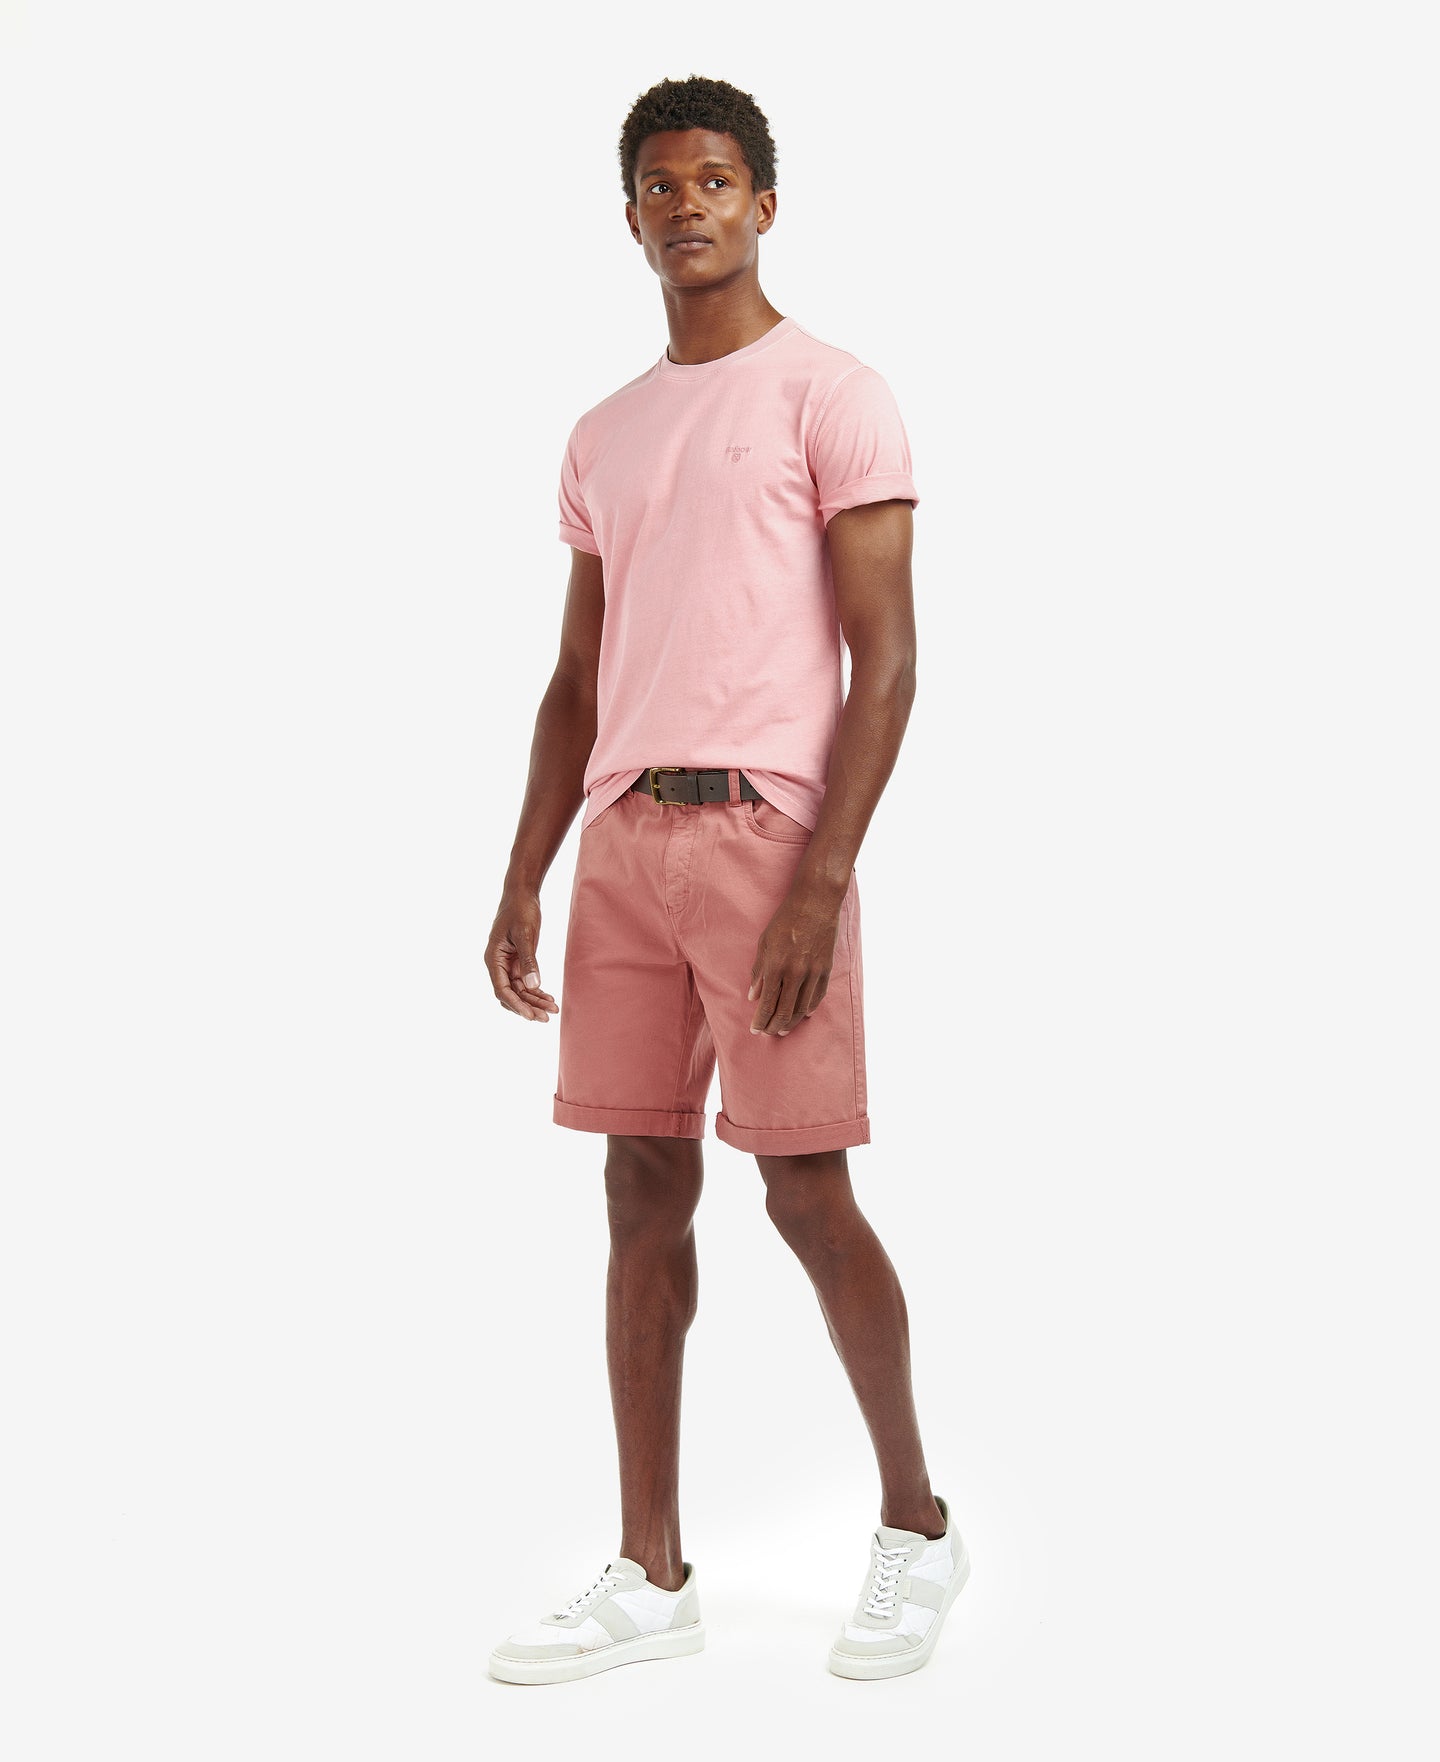 Barbour Mts0994pi15 Barbour Garment Dyed T Pink Sa